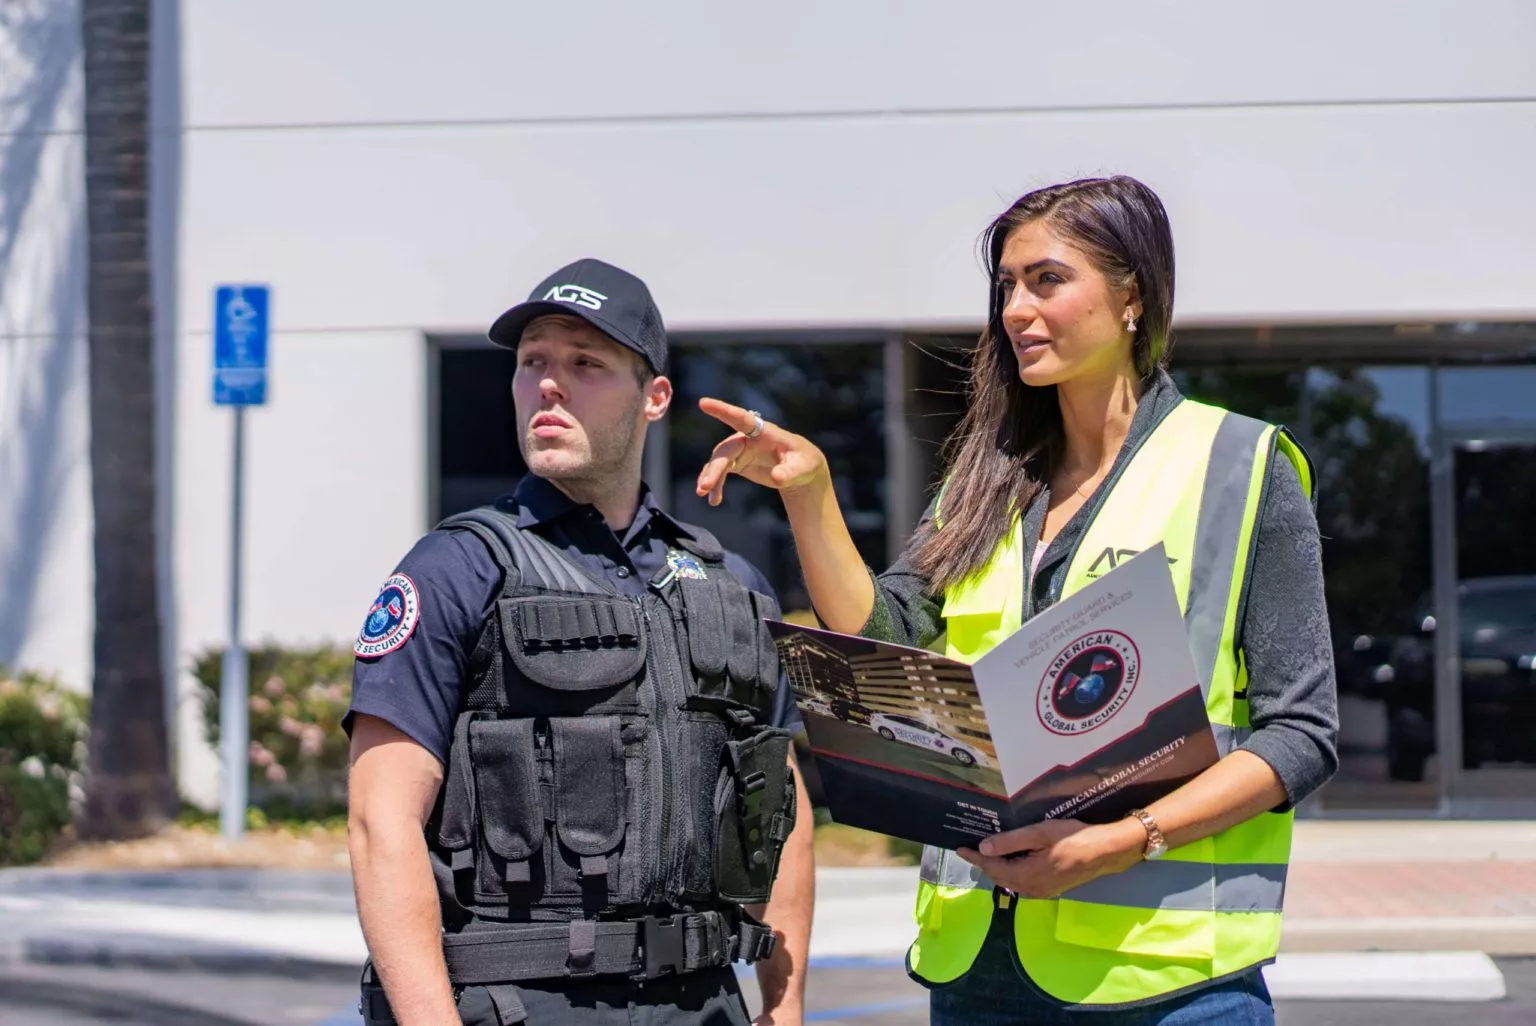 Logistics Security—What Does a Logistics Security Officer Do?